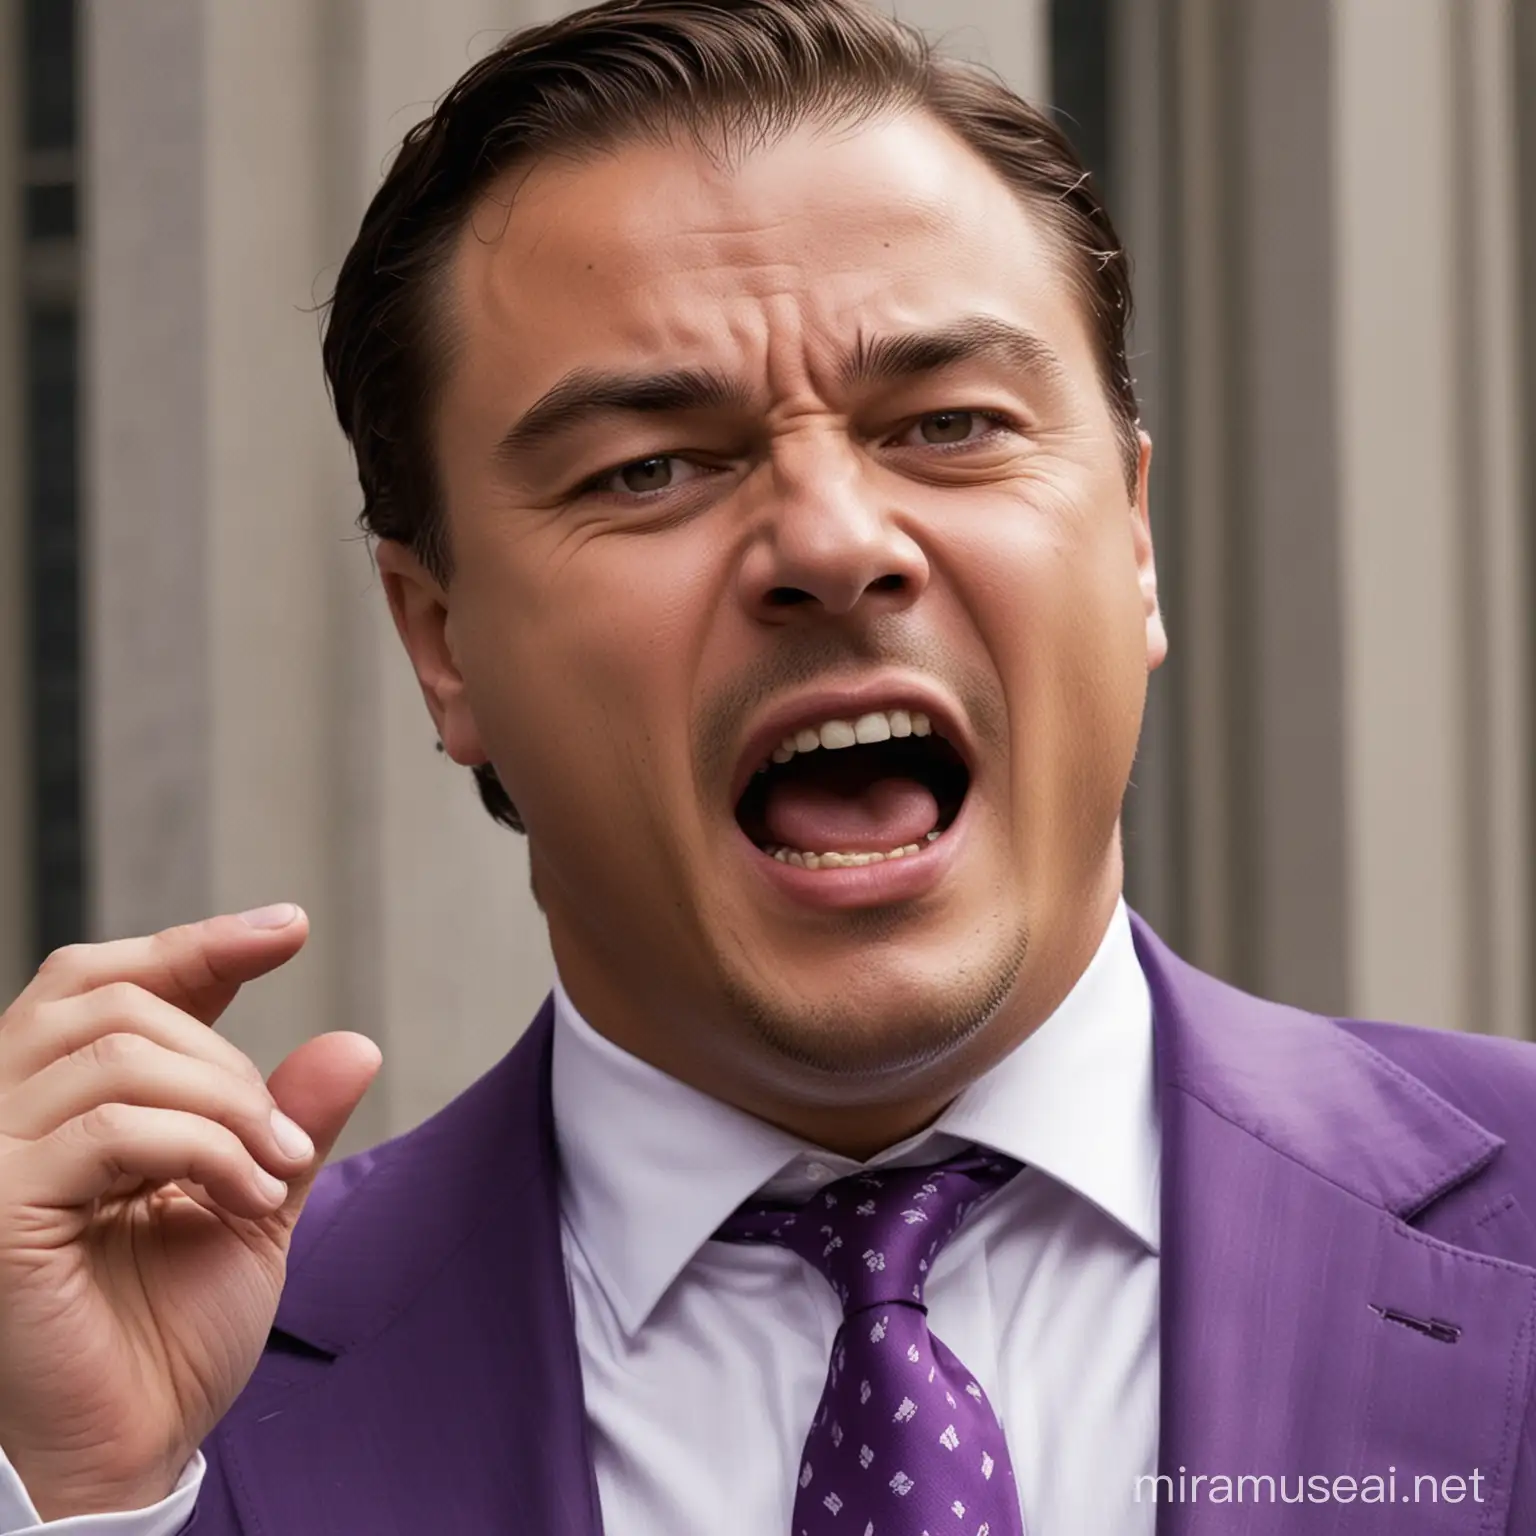 Leonardo DiCaprio as the Wolf of Wall Street Screaming in a Sales Pitch